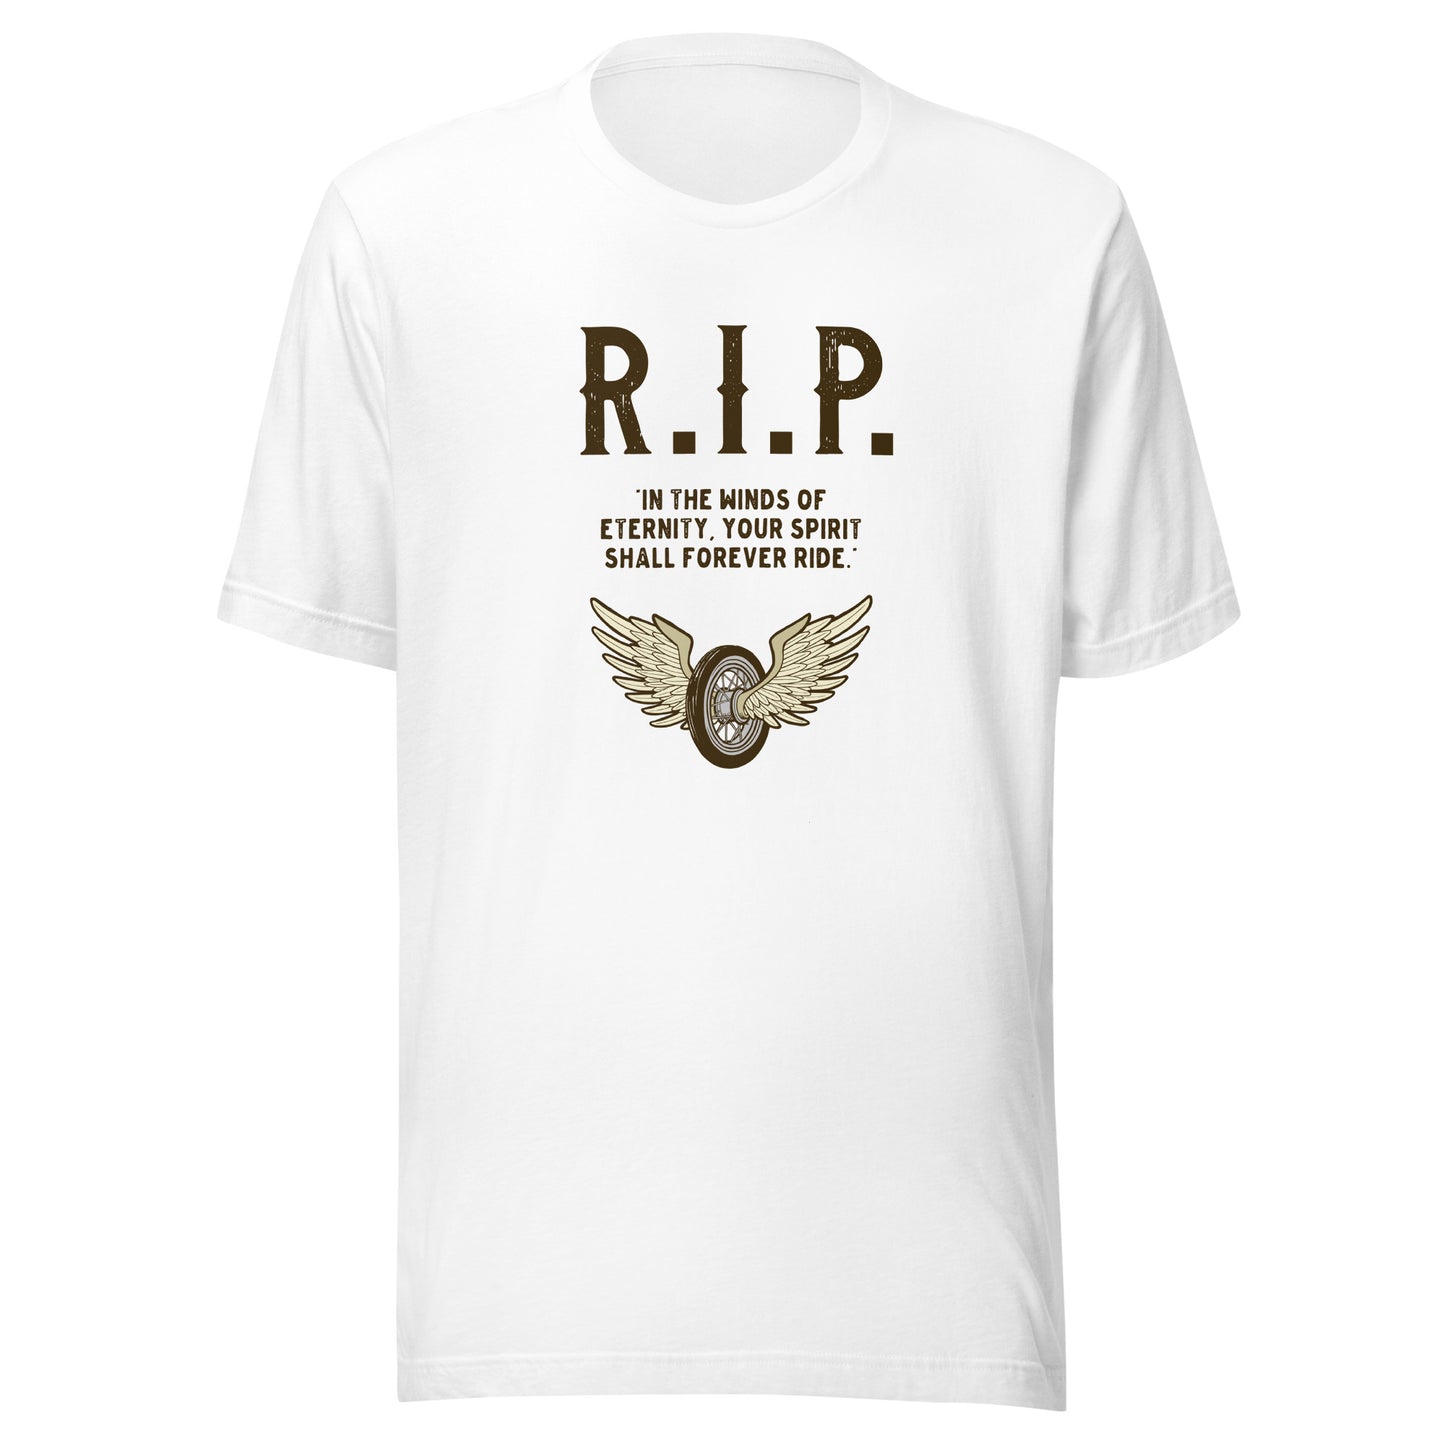 This R.I.P. t-shirt is for motorcyclists. It feels soft and lightweight, with the right amount of stretch. It's comfortable and flattering for all.  In the winds of eternity. Your spirit shall forever ride.